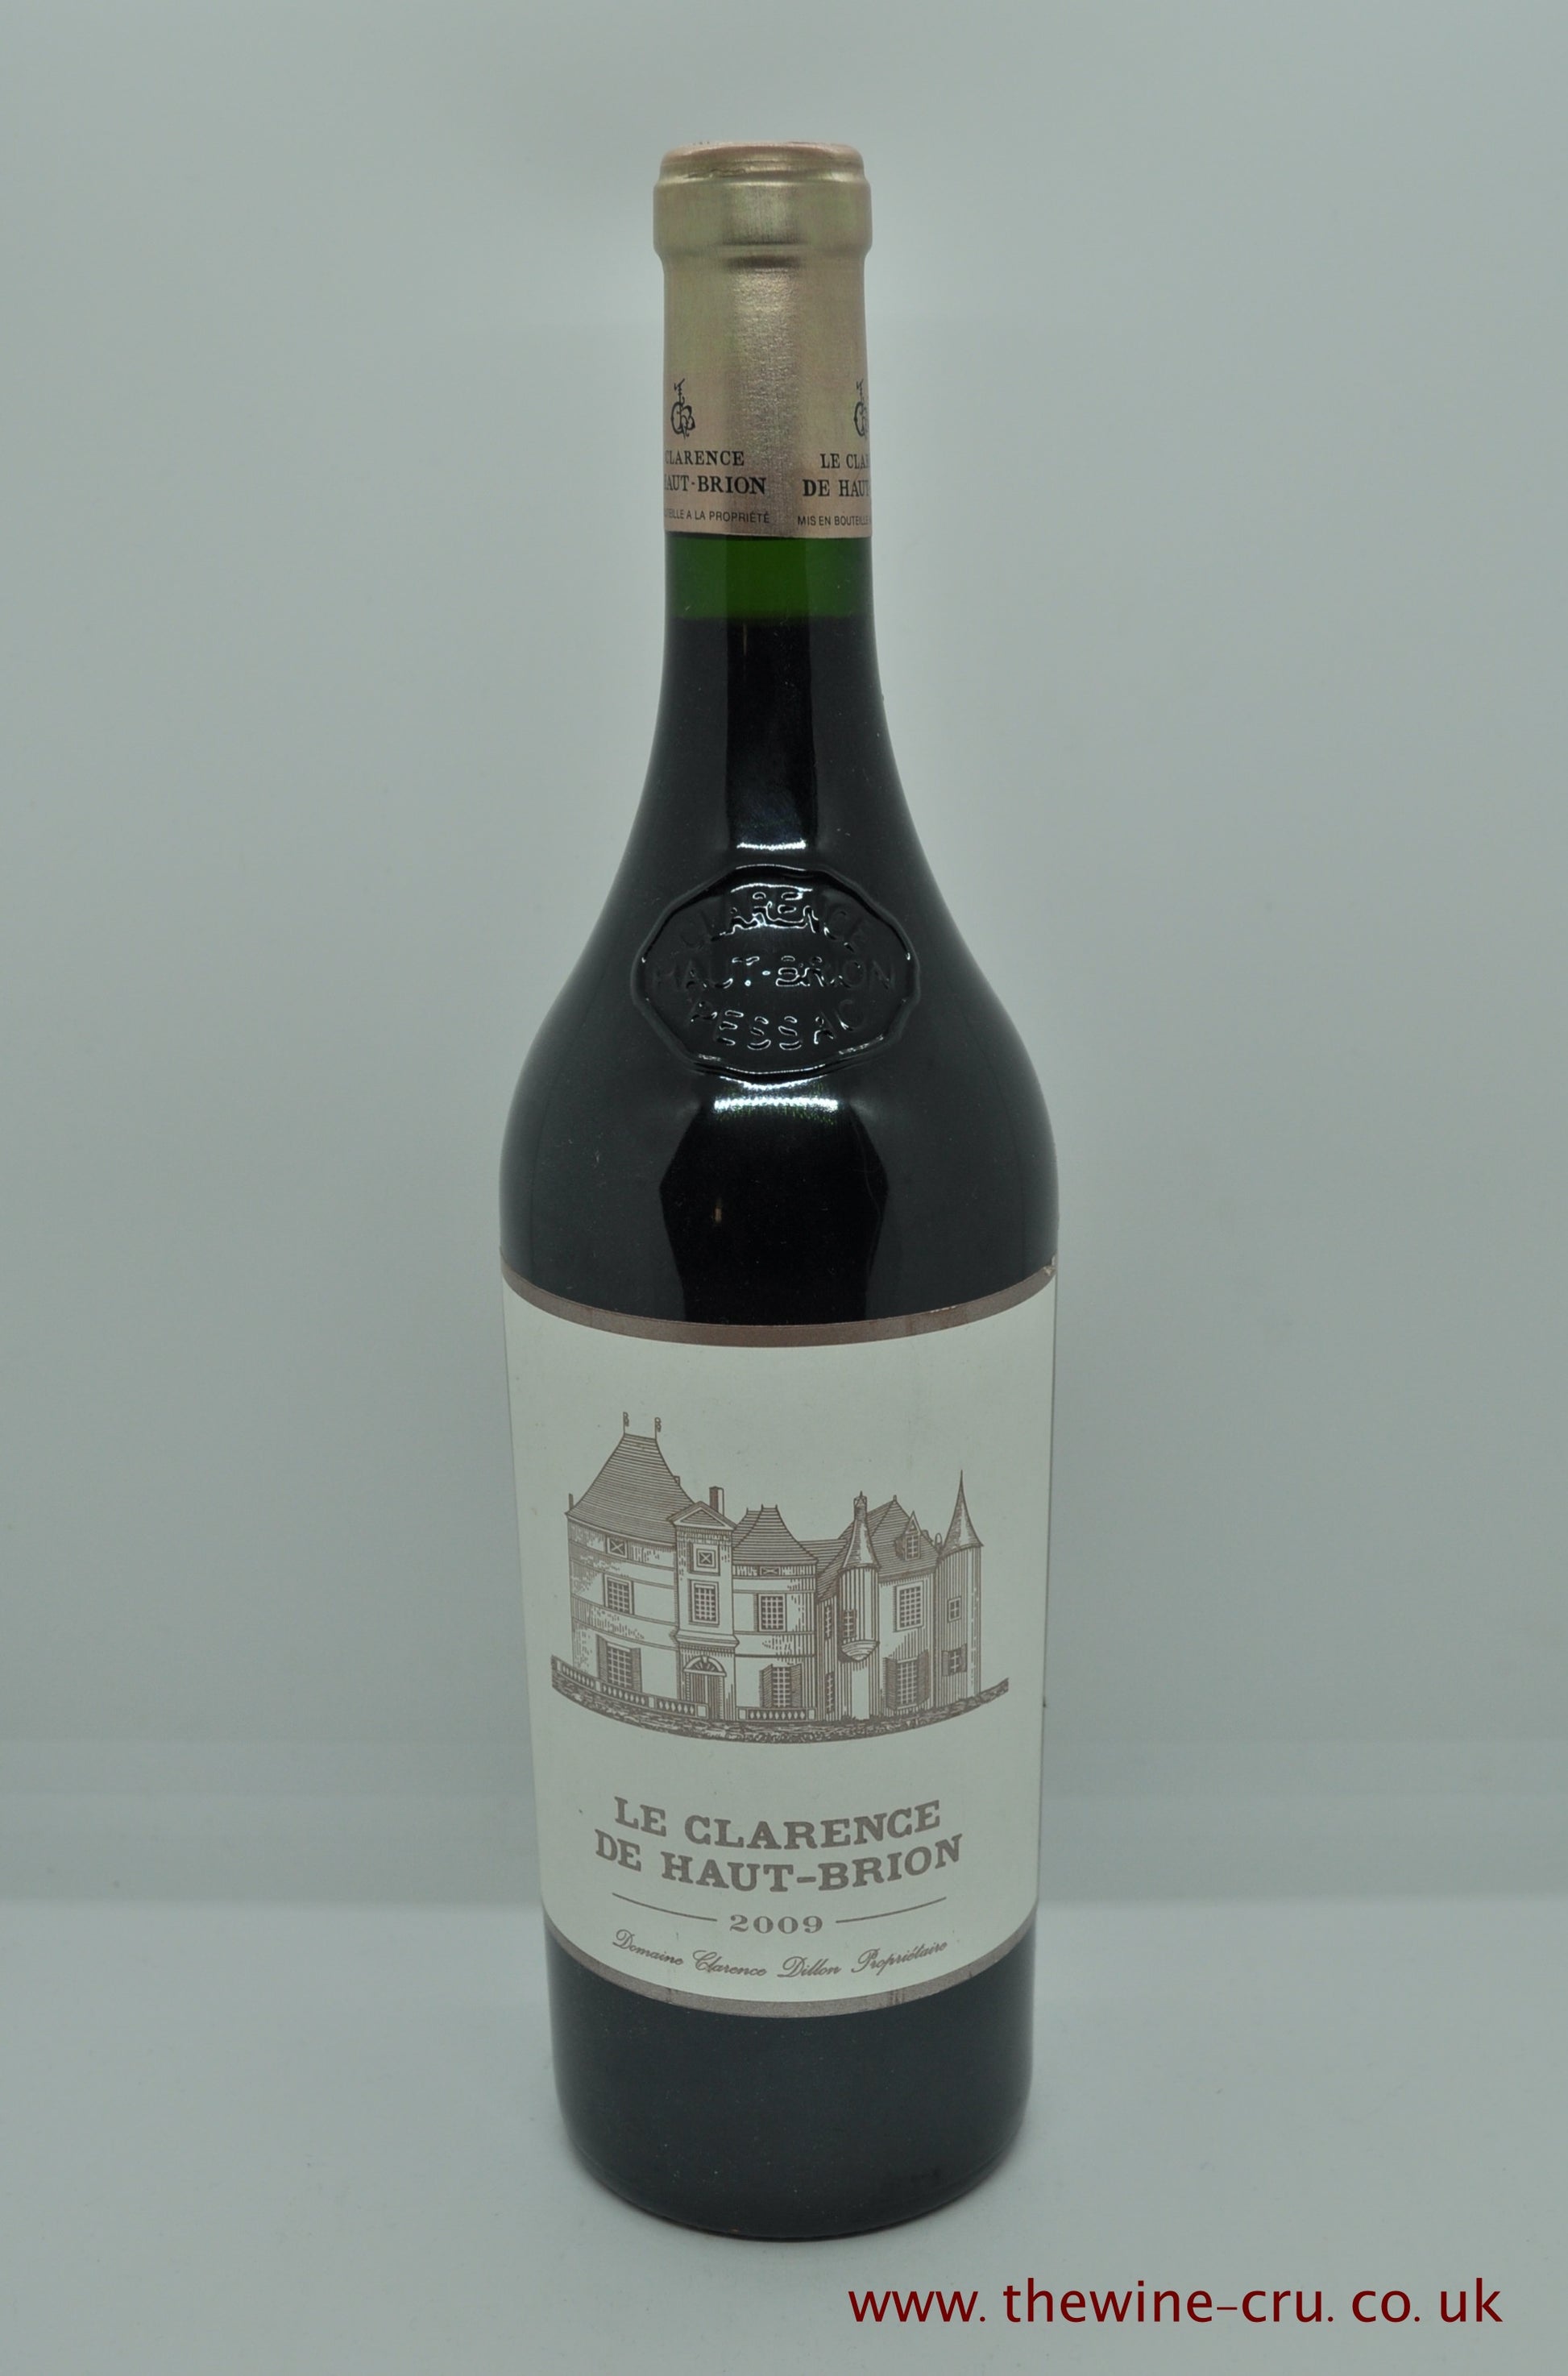 2009 vintage red wine. Le Clarence De Haut Brion 2009. France Bordeaux. Immediate delivery. Free local delivery. Gift wrapping available.